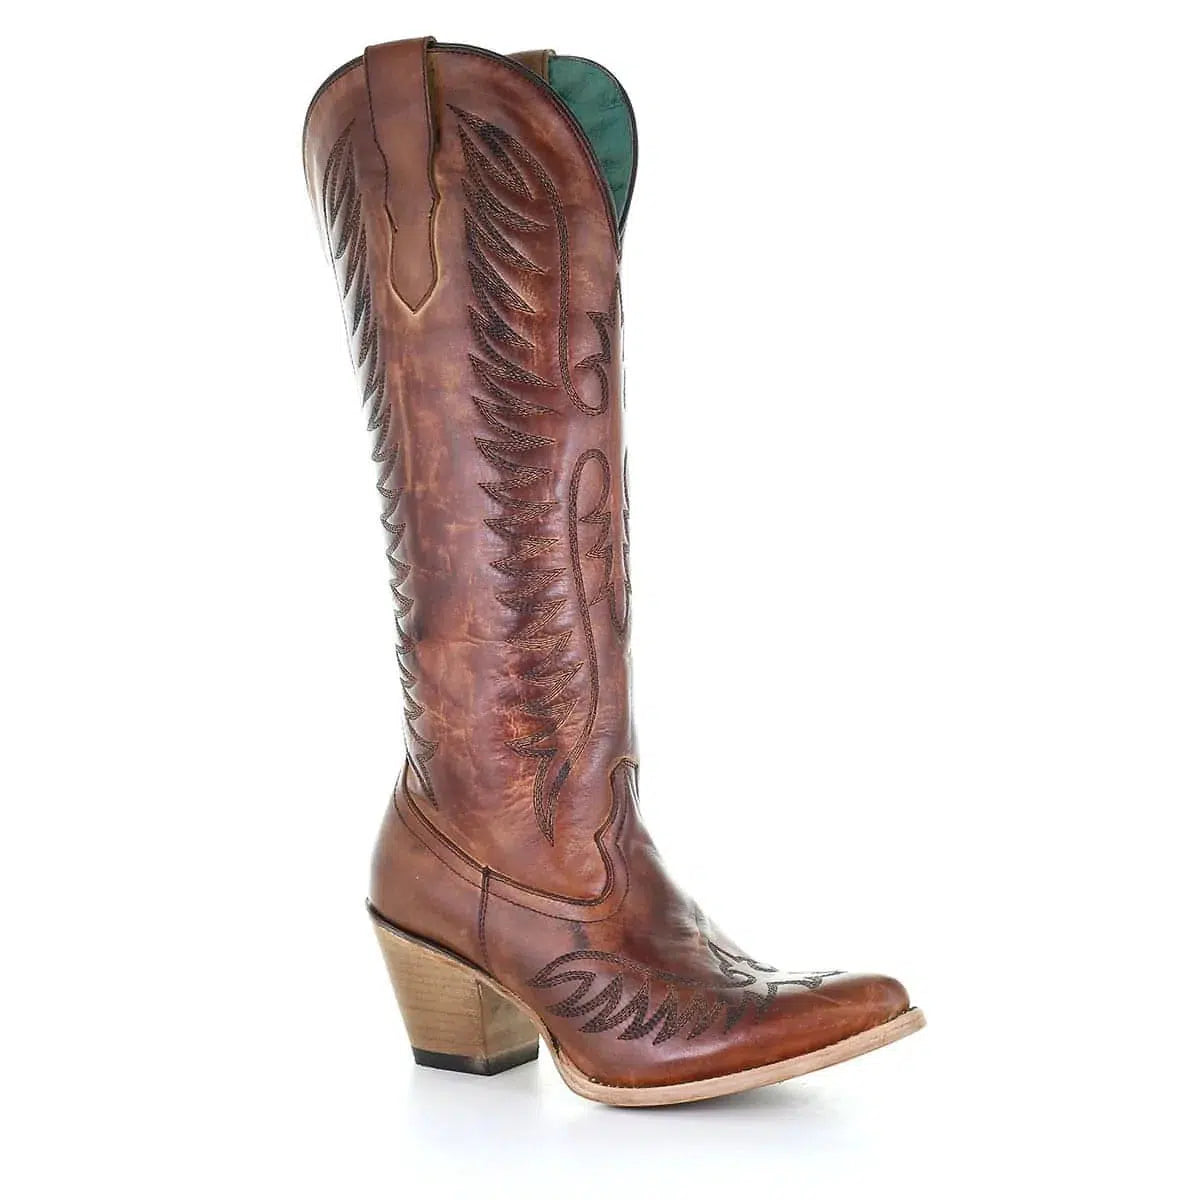 E1570 - M Corral brown western cowgirl leather long boots for women-Kuet.us